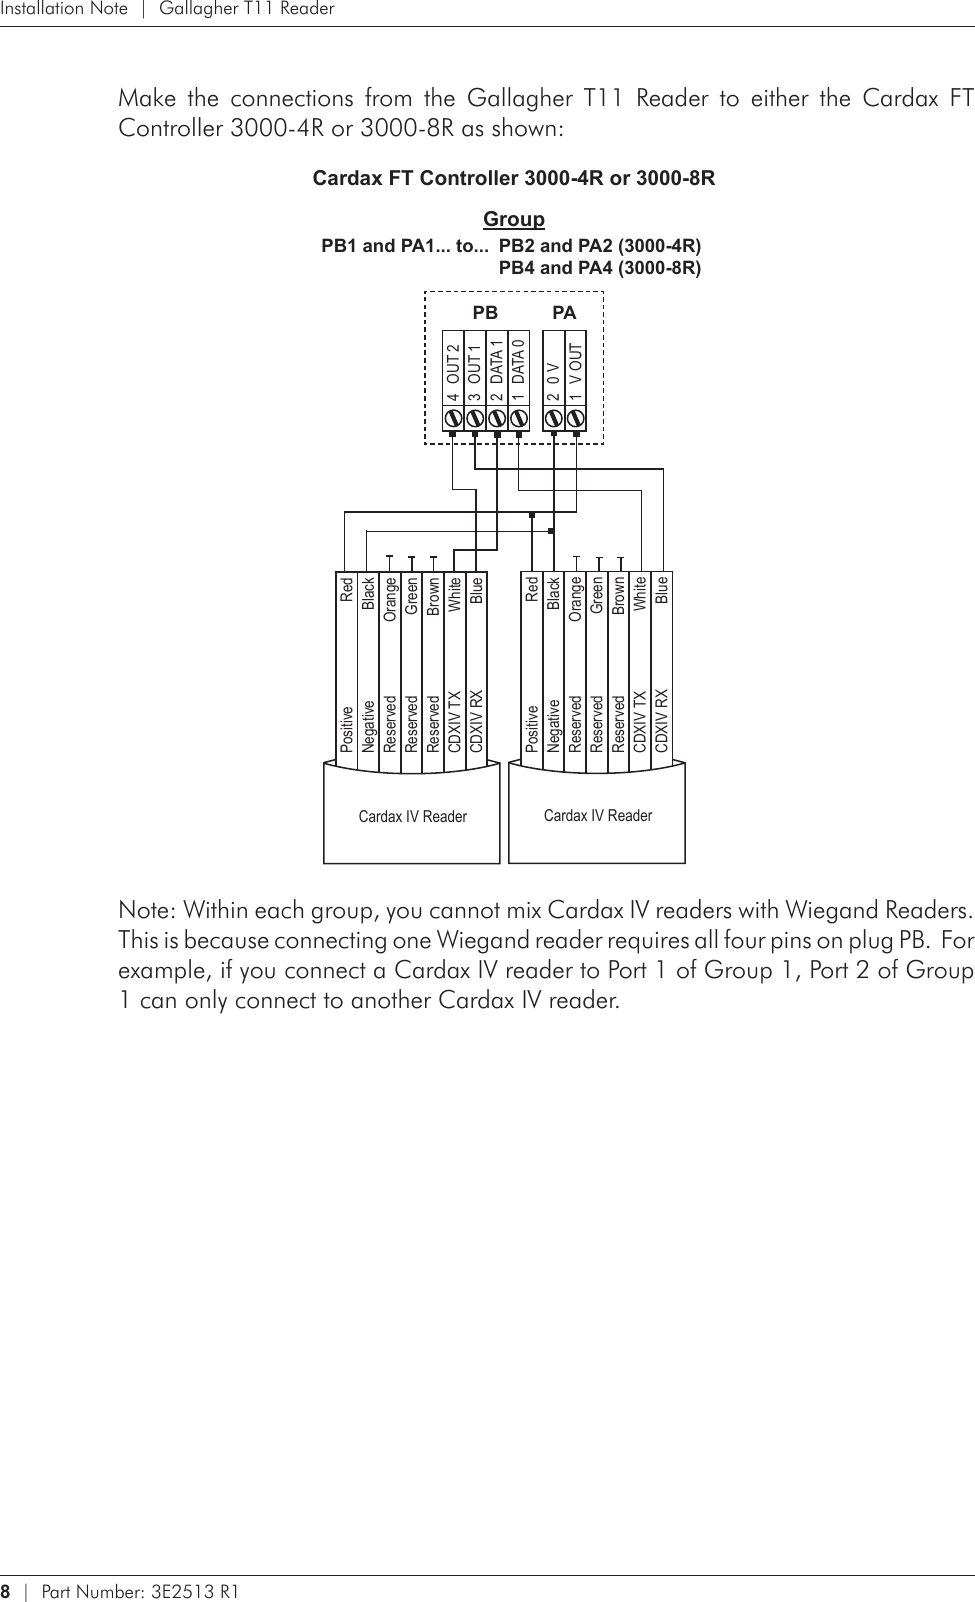 8   |  Part Number: 3E2513 R1Installation Note  |  Gallagher T11 ReaderMake  the  connections  from  the  Gallagher  T11  Reader  to  either  the  Cardax  FT Controller 3000-4R or 3000-8R as shown:    PB1 and PA1... to...  PB2 and PA2 (3000-4R)    PB4 and PA4 (3000-8R)Cardax FT Controller 3000-4R or 3000-8RGroup1  V OUT2  0 V1  DATA 02  DATA 13  OUT 14  OUT 2PB PAPositive RedNegative BlackReserved OrangeReserved GreenReserved BrownCDXIV TX WhiteCDXIV RX BlueCardax IV ReaderPositive RedNegative BlackReserved OrangeReserved GreenReserved BrownCDXIV TX WhiteCDXIV RX BlueCardax IV ReaderNote: Within each group, you cannot mix Cardax IV readers with Wiegand Readers.  This is because connecting one Wiegand reader requires all four pins on plug PB.  For example, if you connect a Cardax IV reader to Port 1 of Group 1, Port 2 of Group 1 can only connect to another Cardax IV reader.